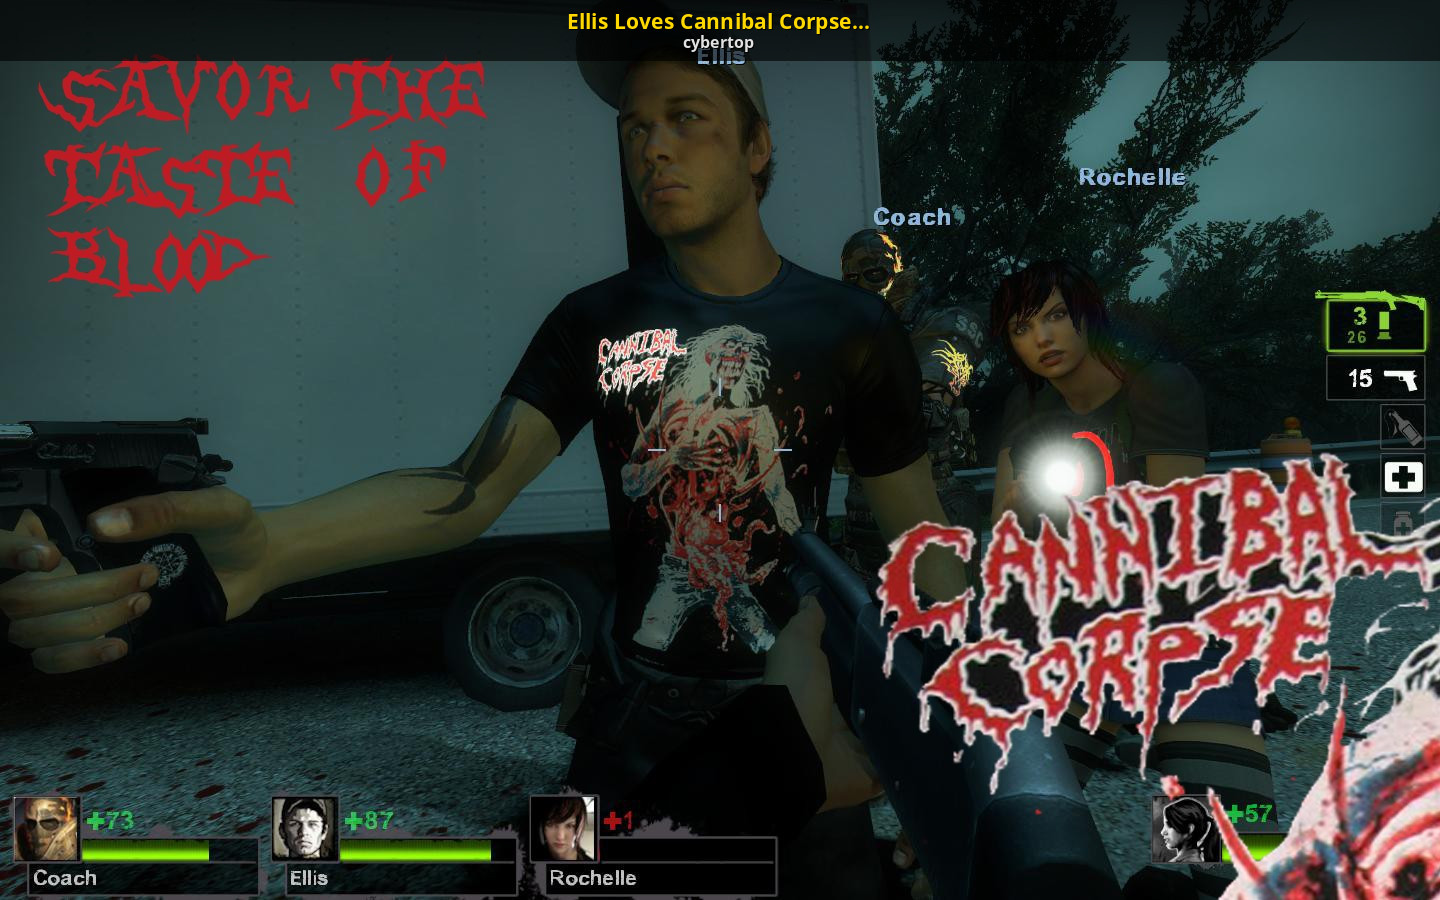 A Left 4 Dead 2 (L4D2) Mod in the Ellis category, submitted by cybertop.